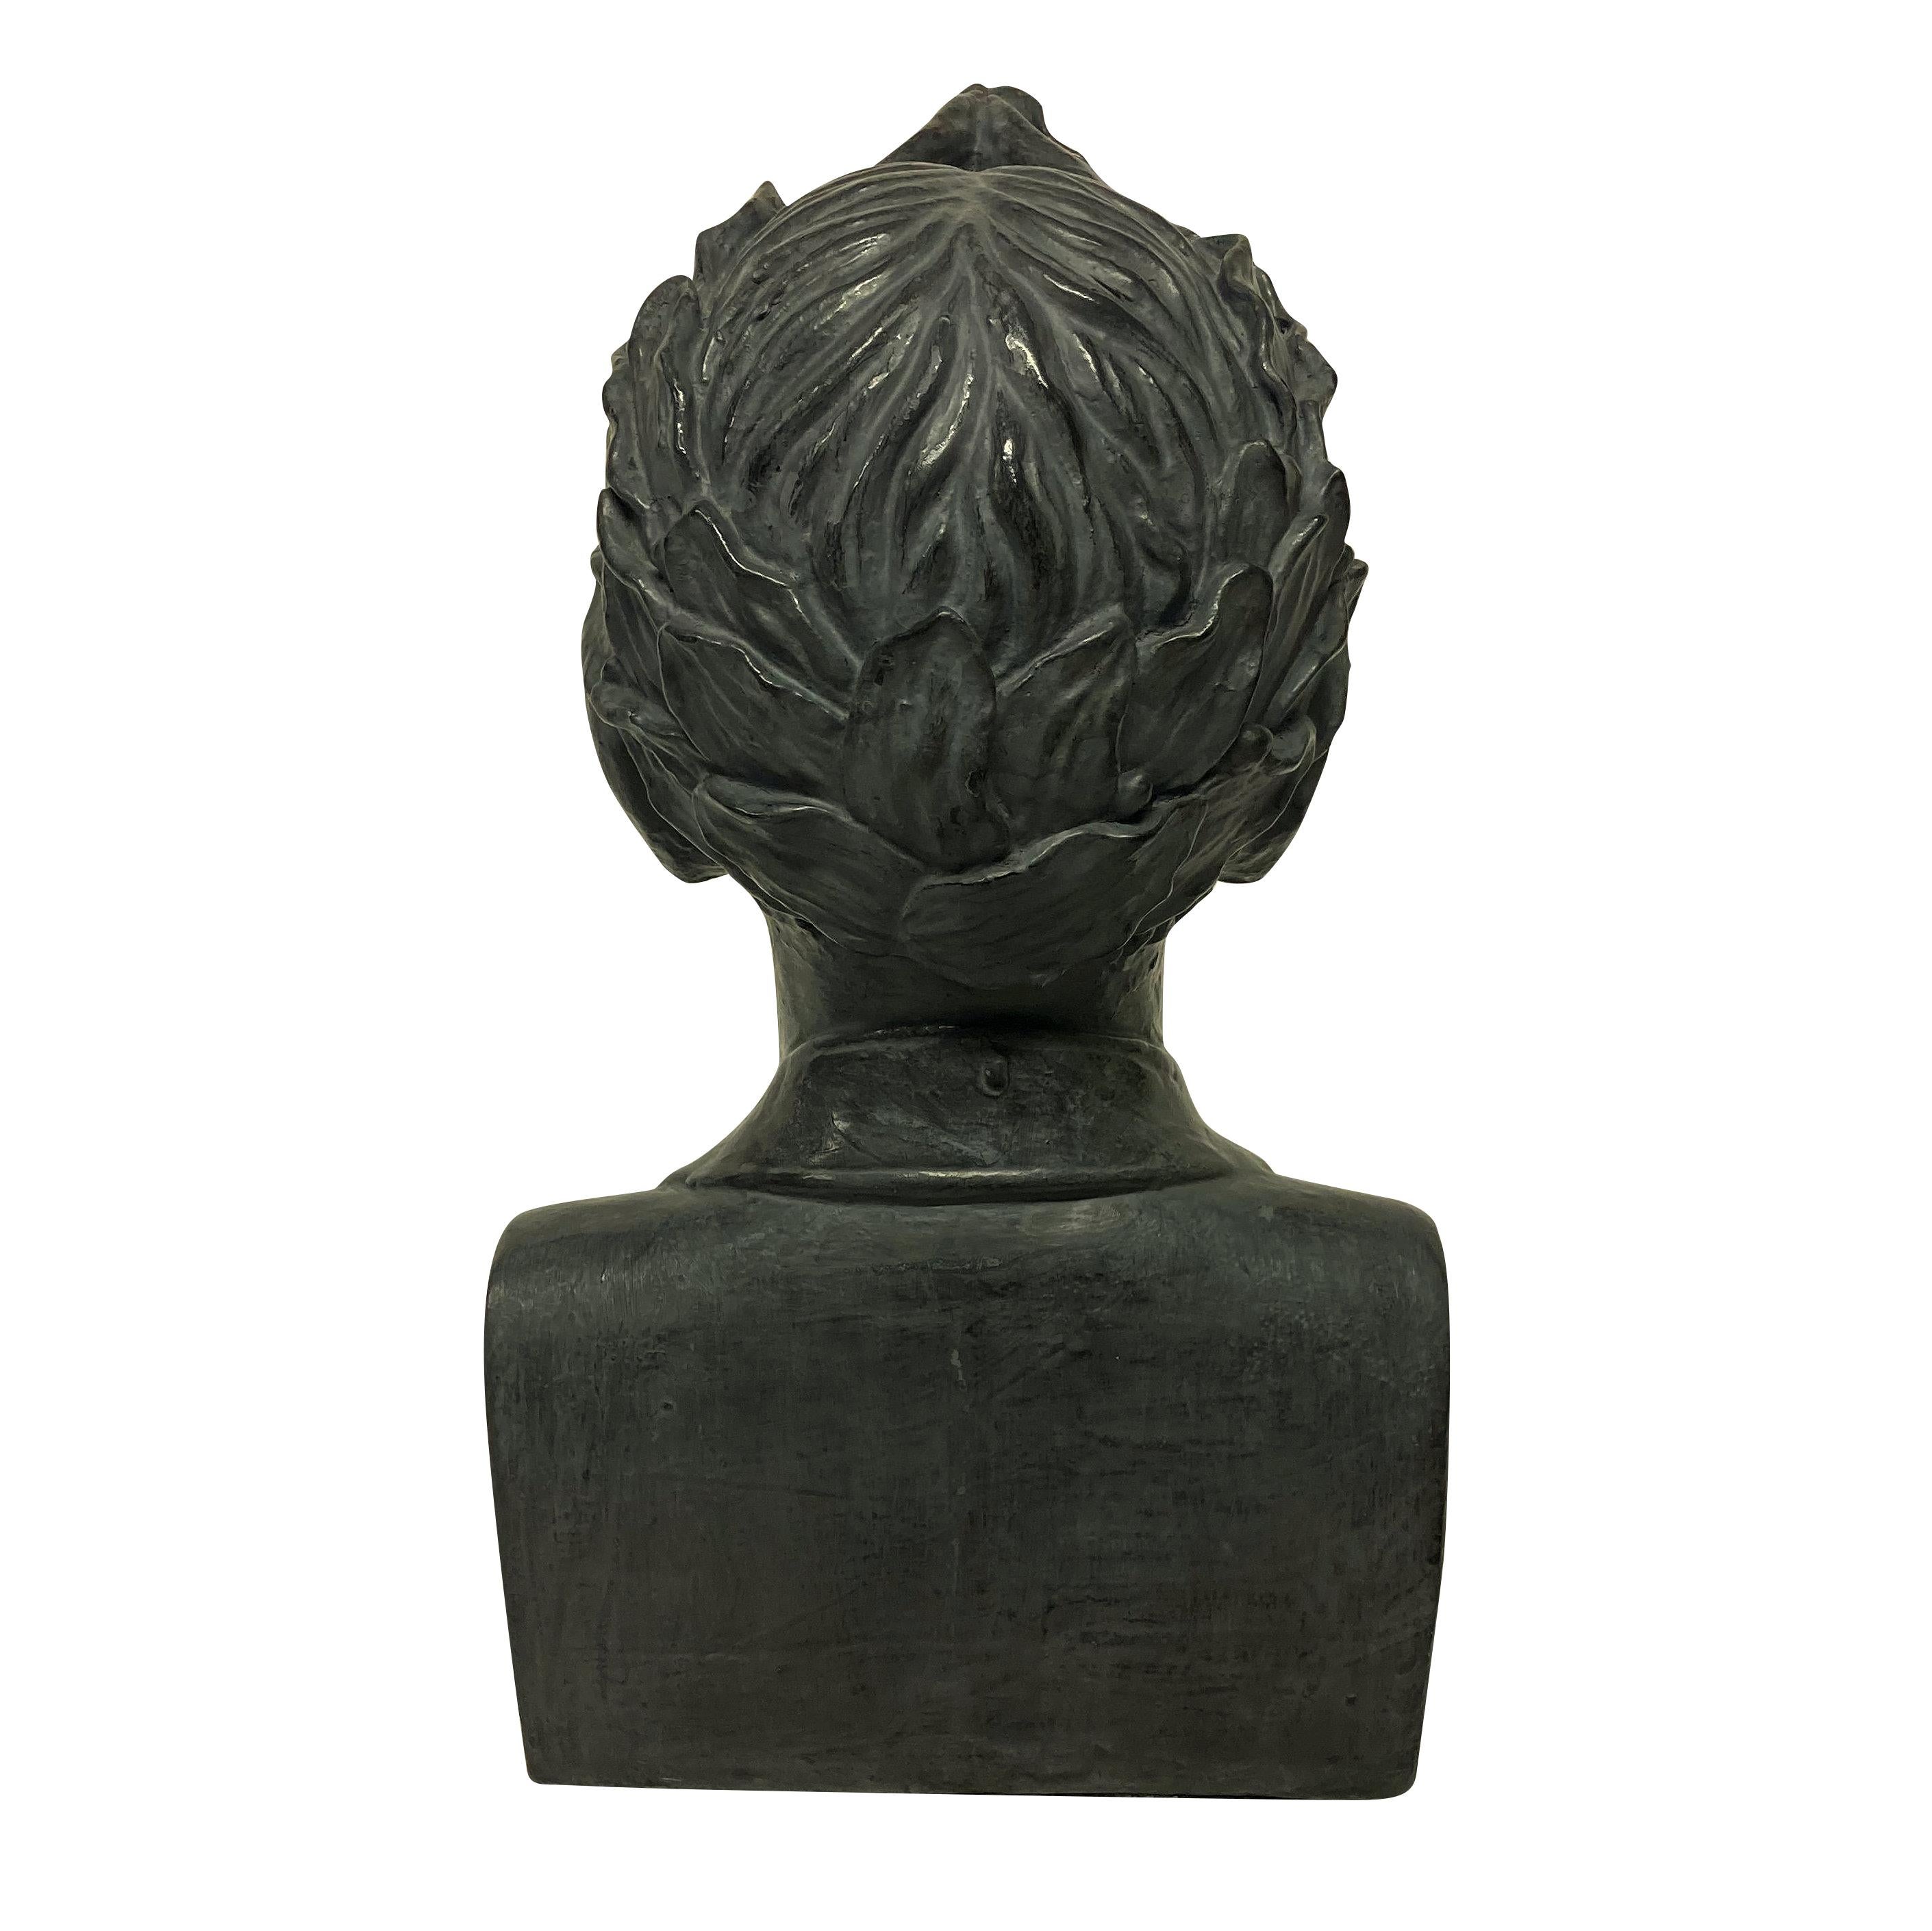 A French painted plaster bust of Napoleon as Emperor, in basalt grey.

